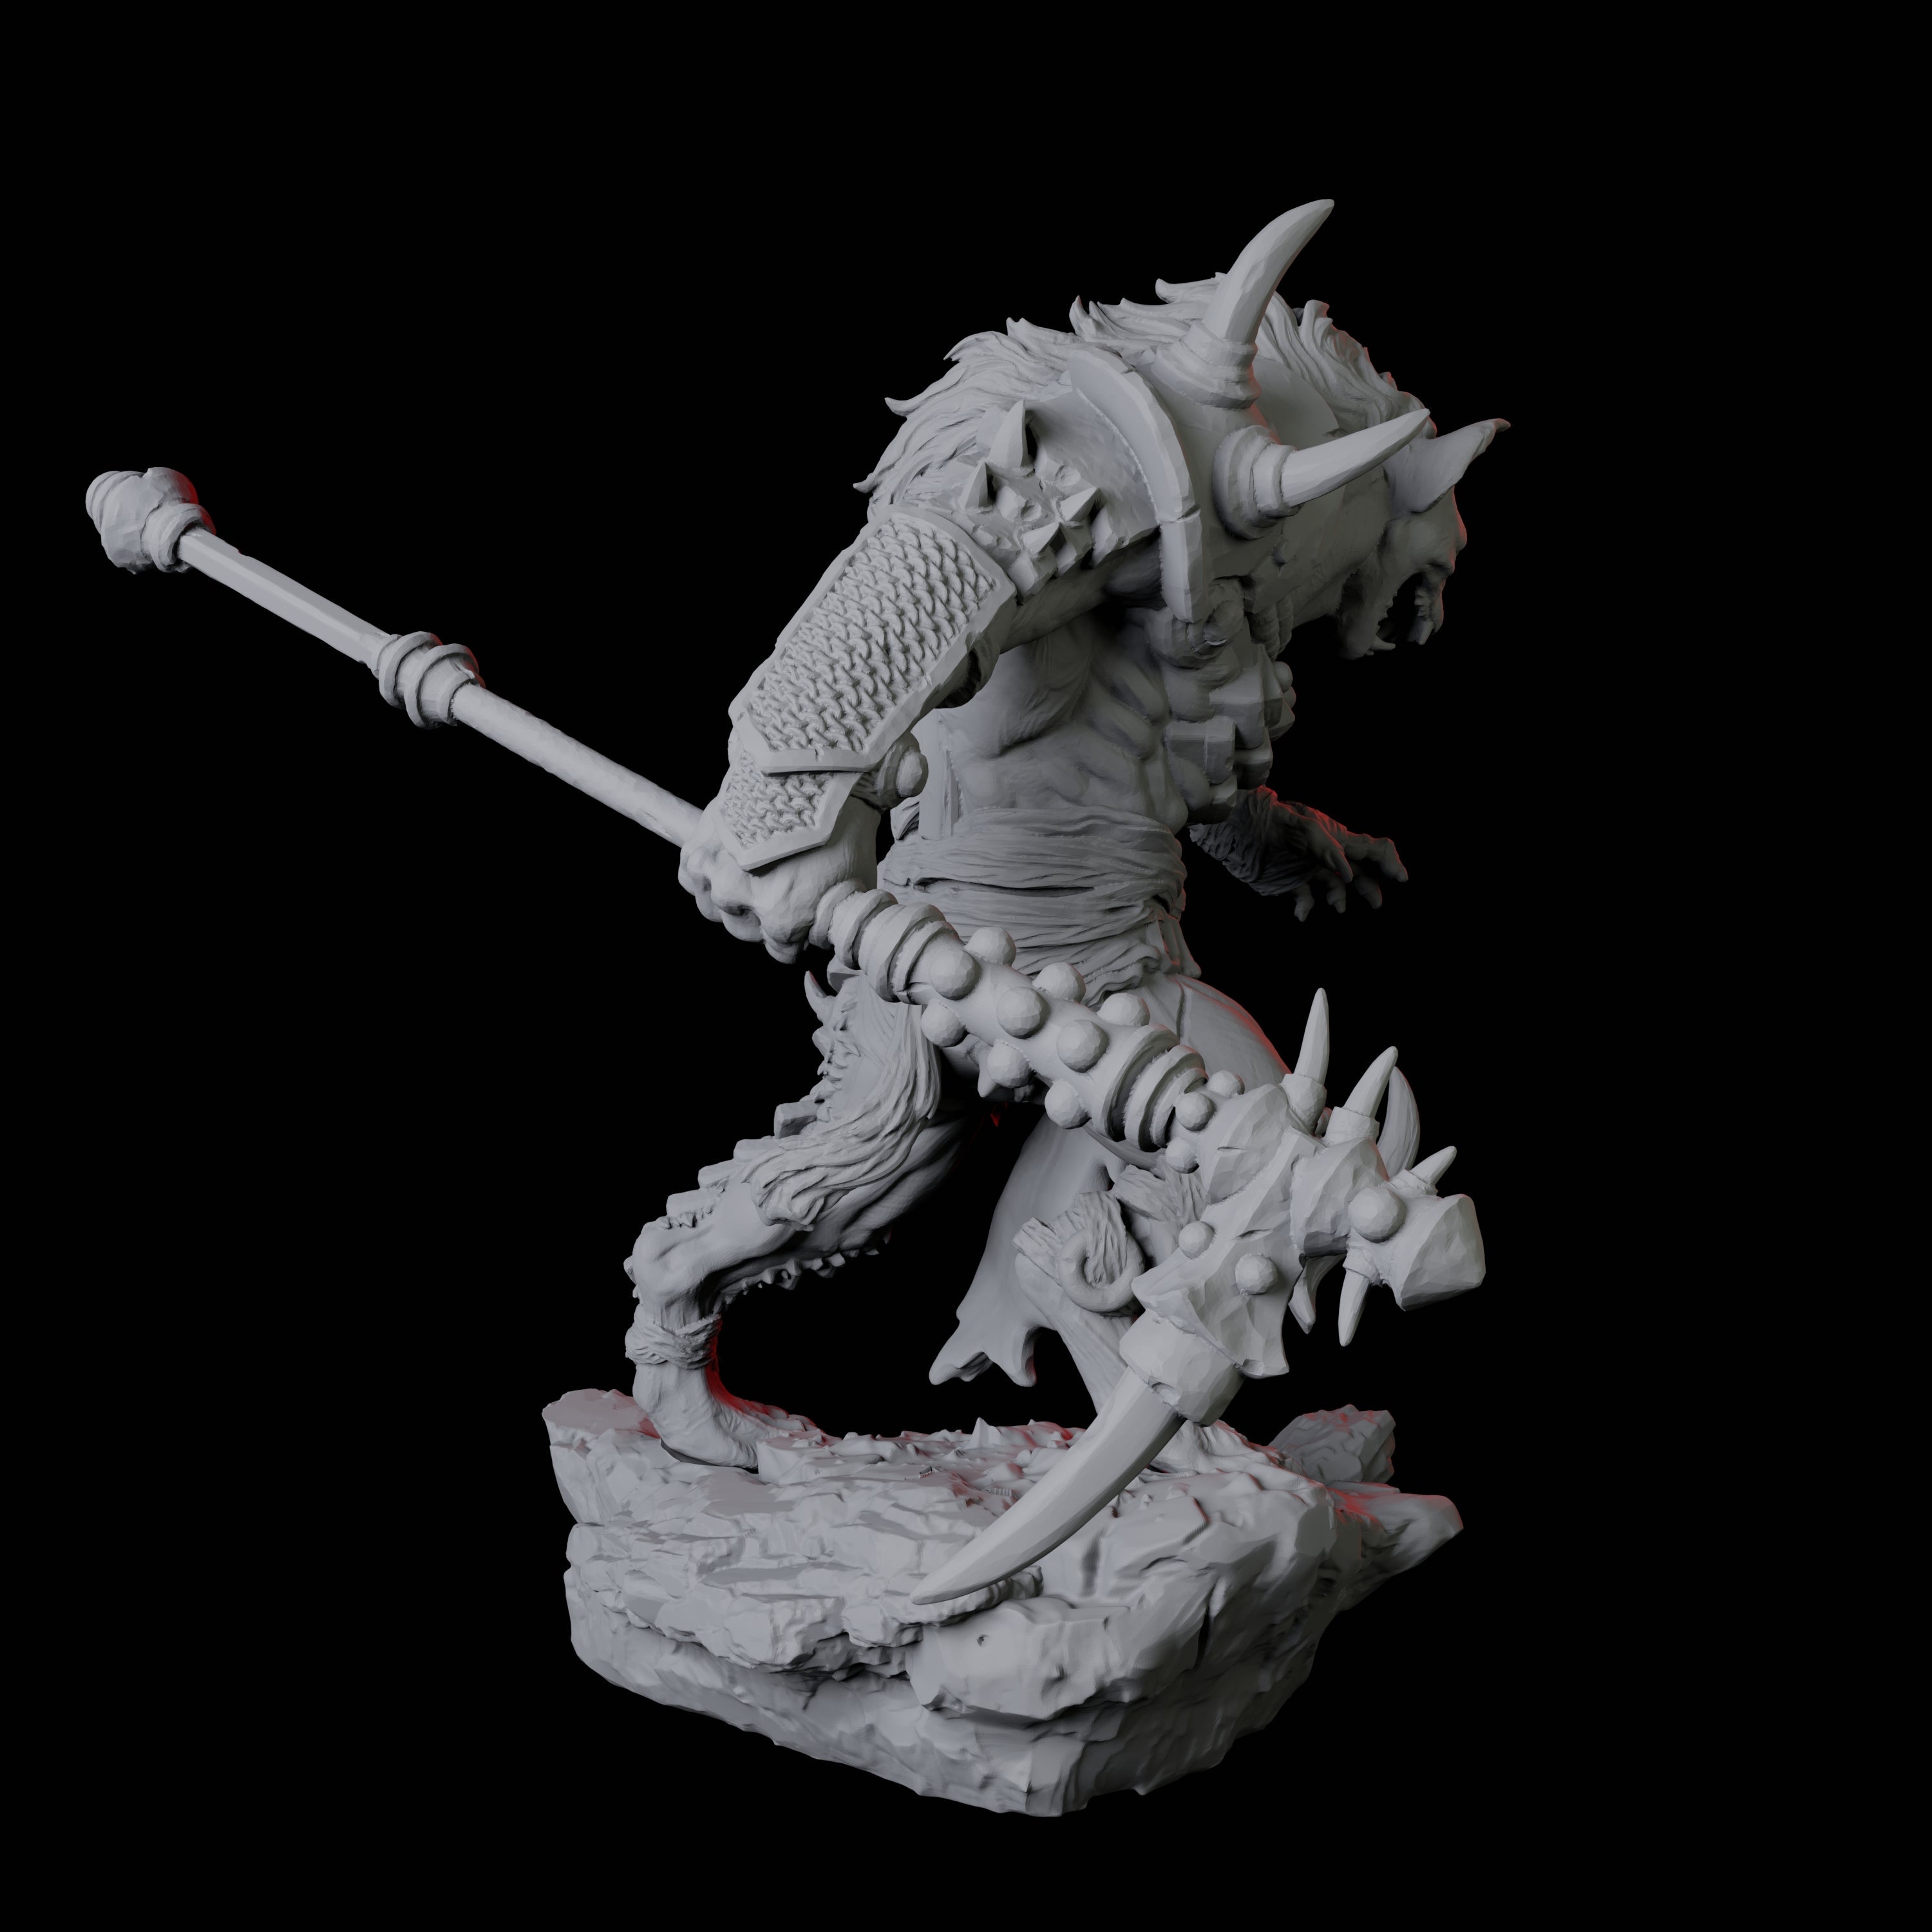 Gnoll Scout A Miniature for Dungeons and Dragons, Pathfinder or other TTRPGs